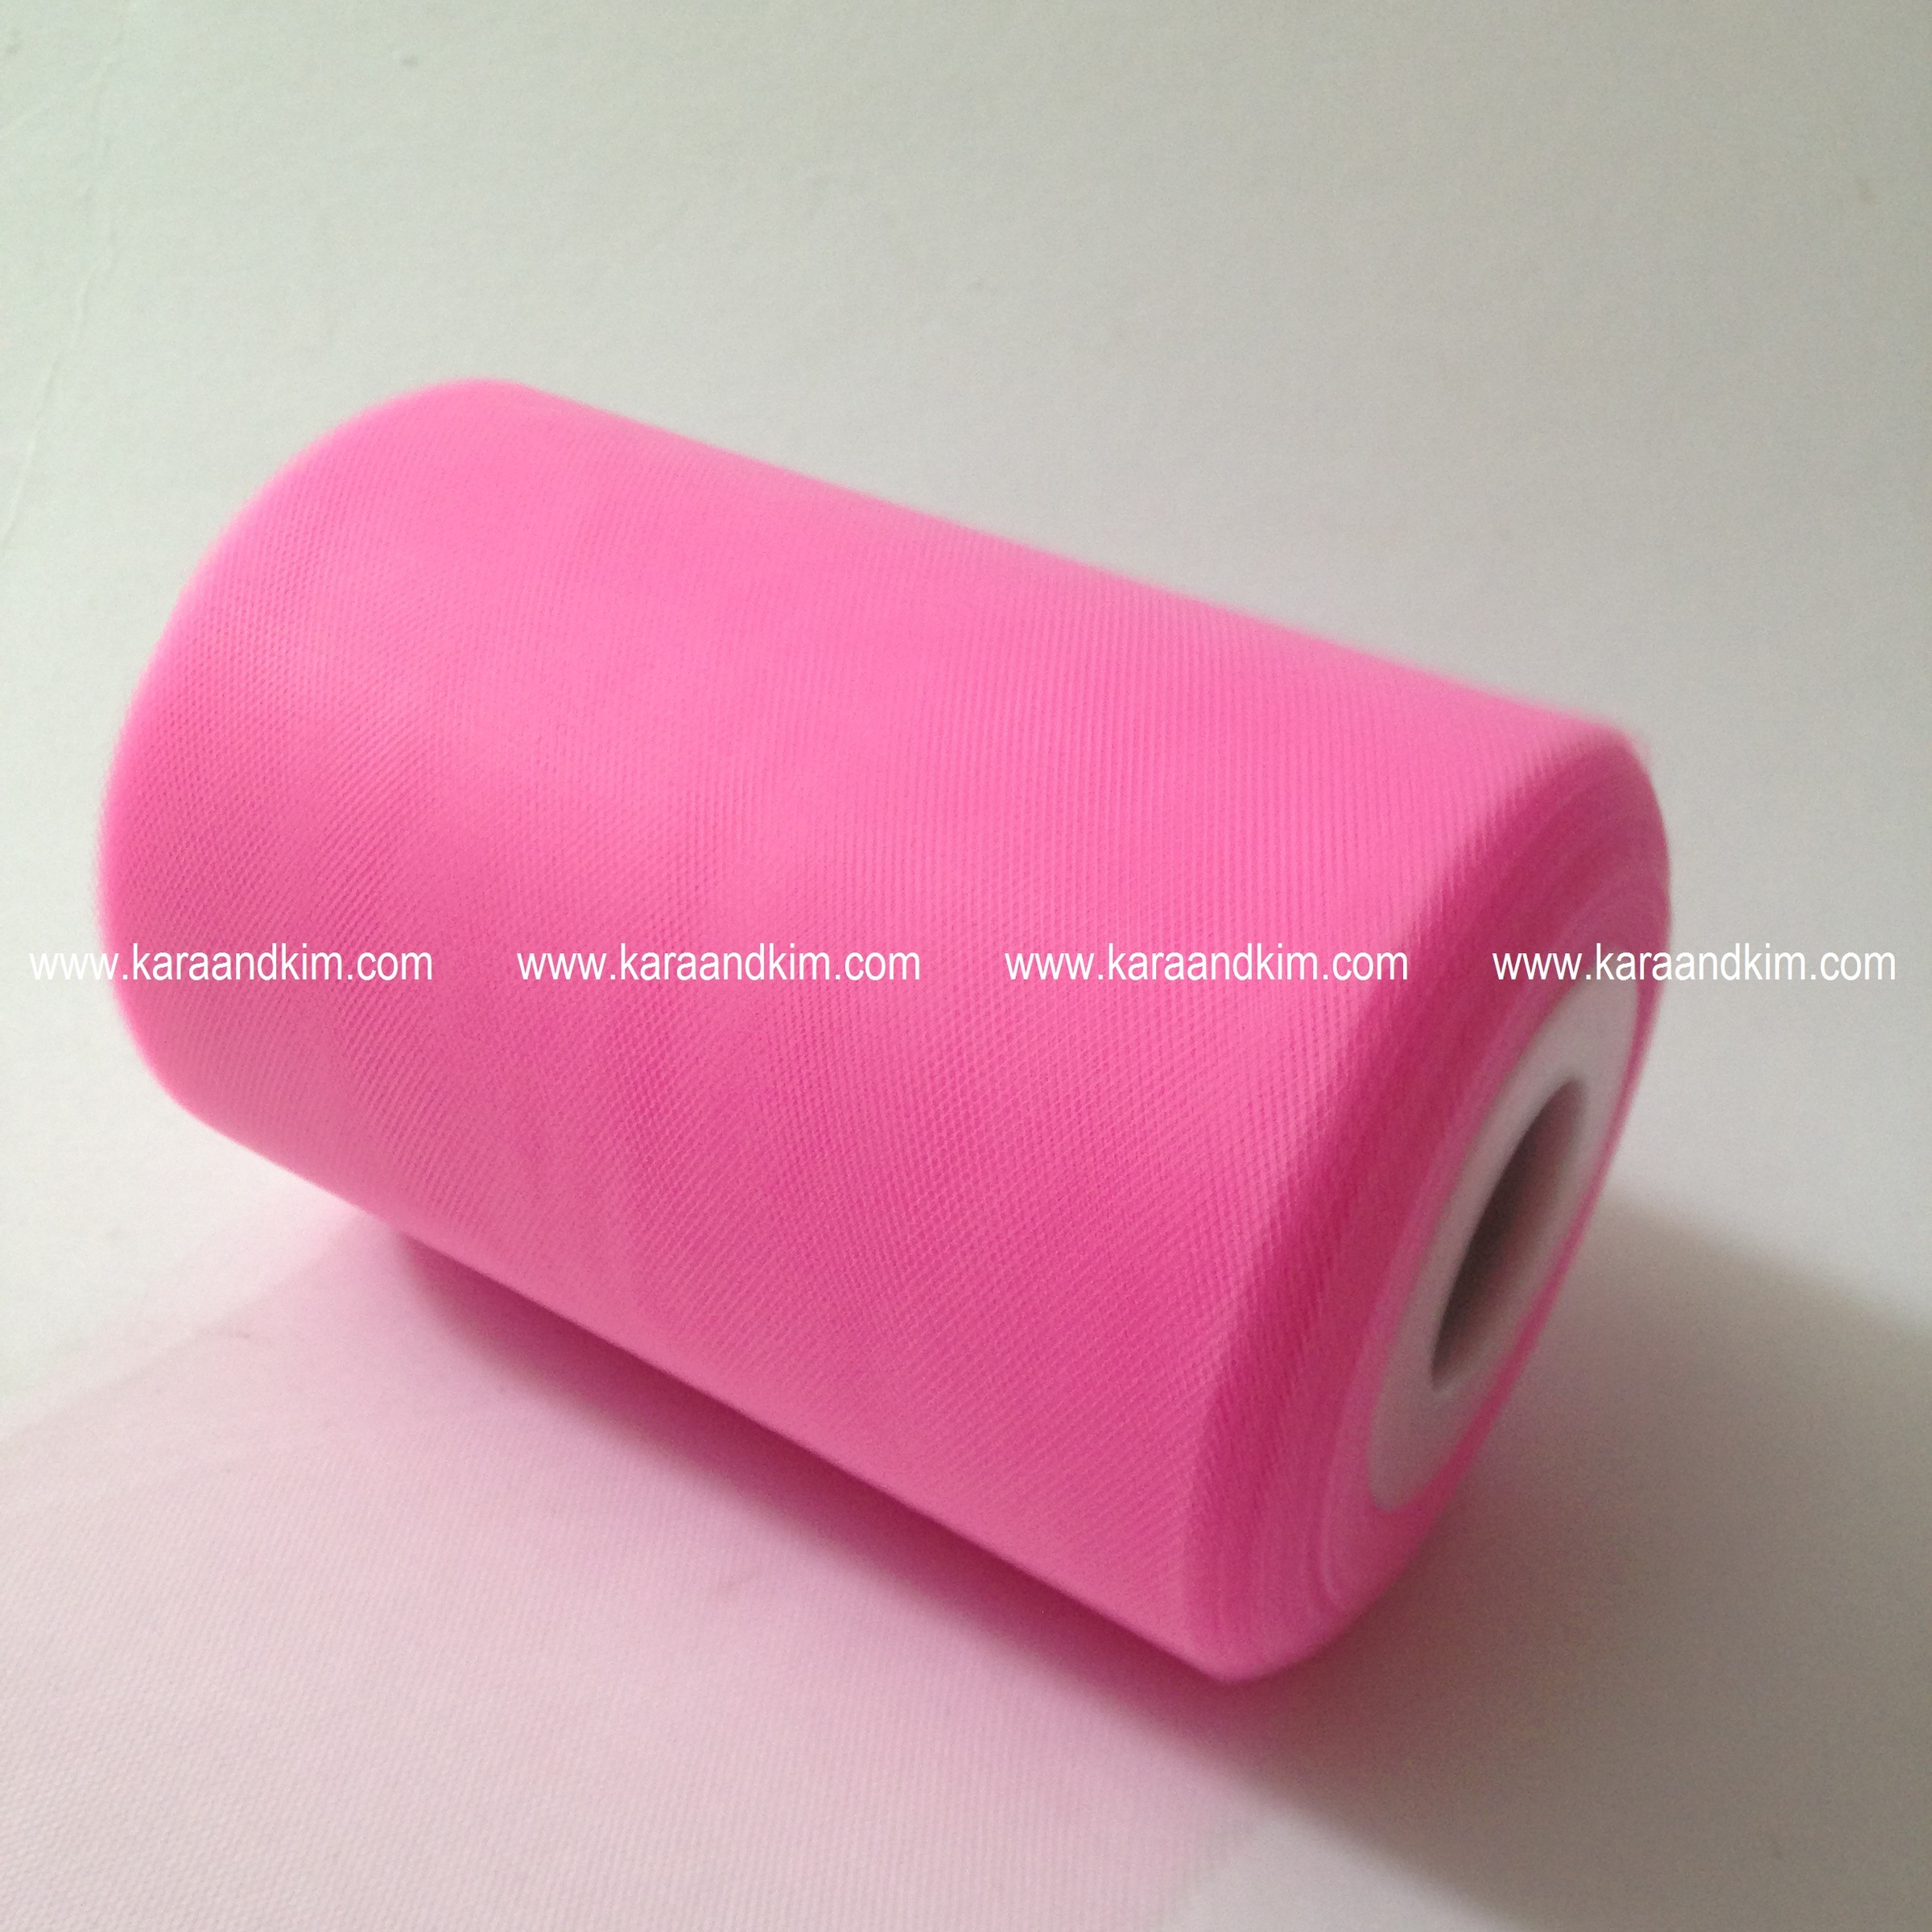 KISSITTY 1 Roll/20 Yards Pink Spiderweb Netting Fabric 75mm Tulle Mesh  Fabric Roll Big Hole Tulle for Skirt Flower Poms Wrap Packing DIY Handmade